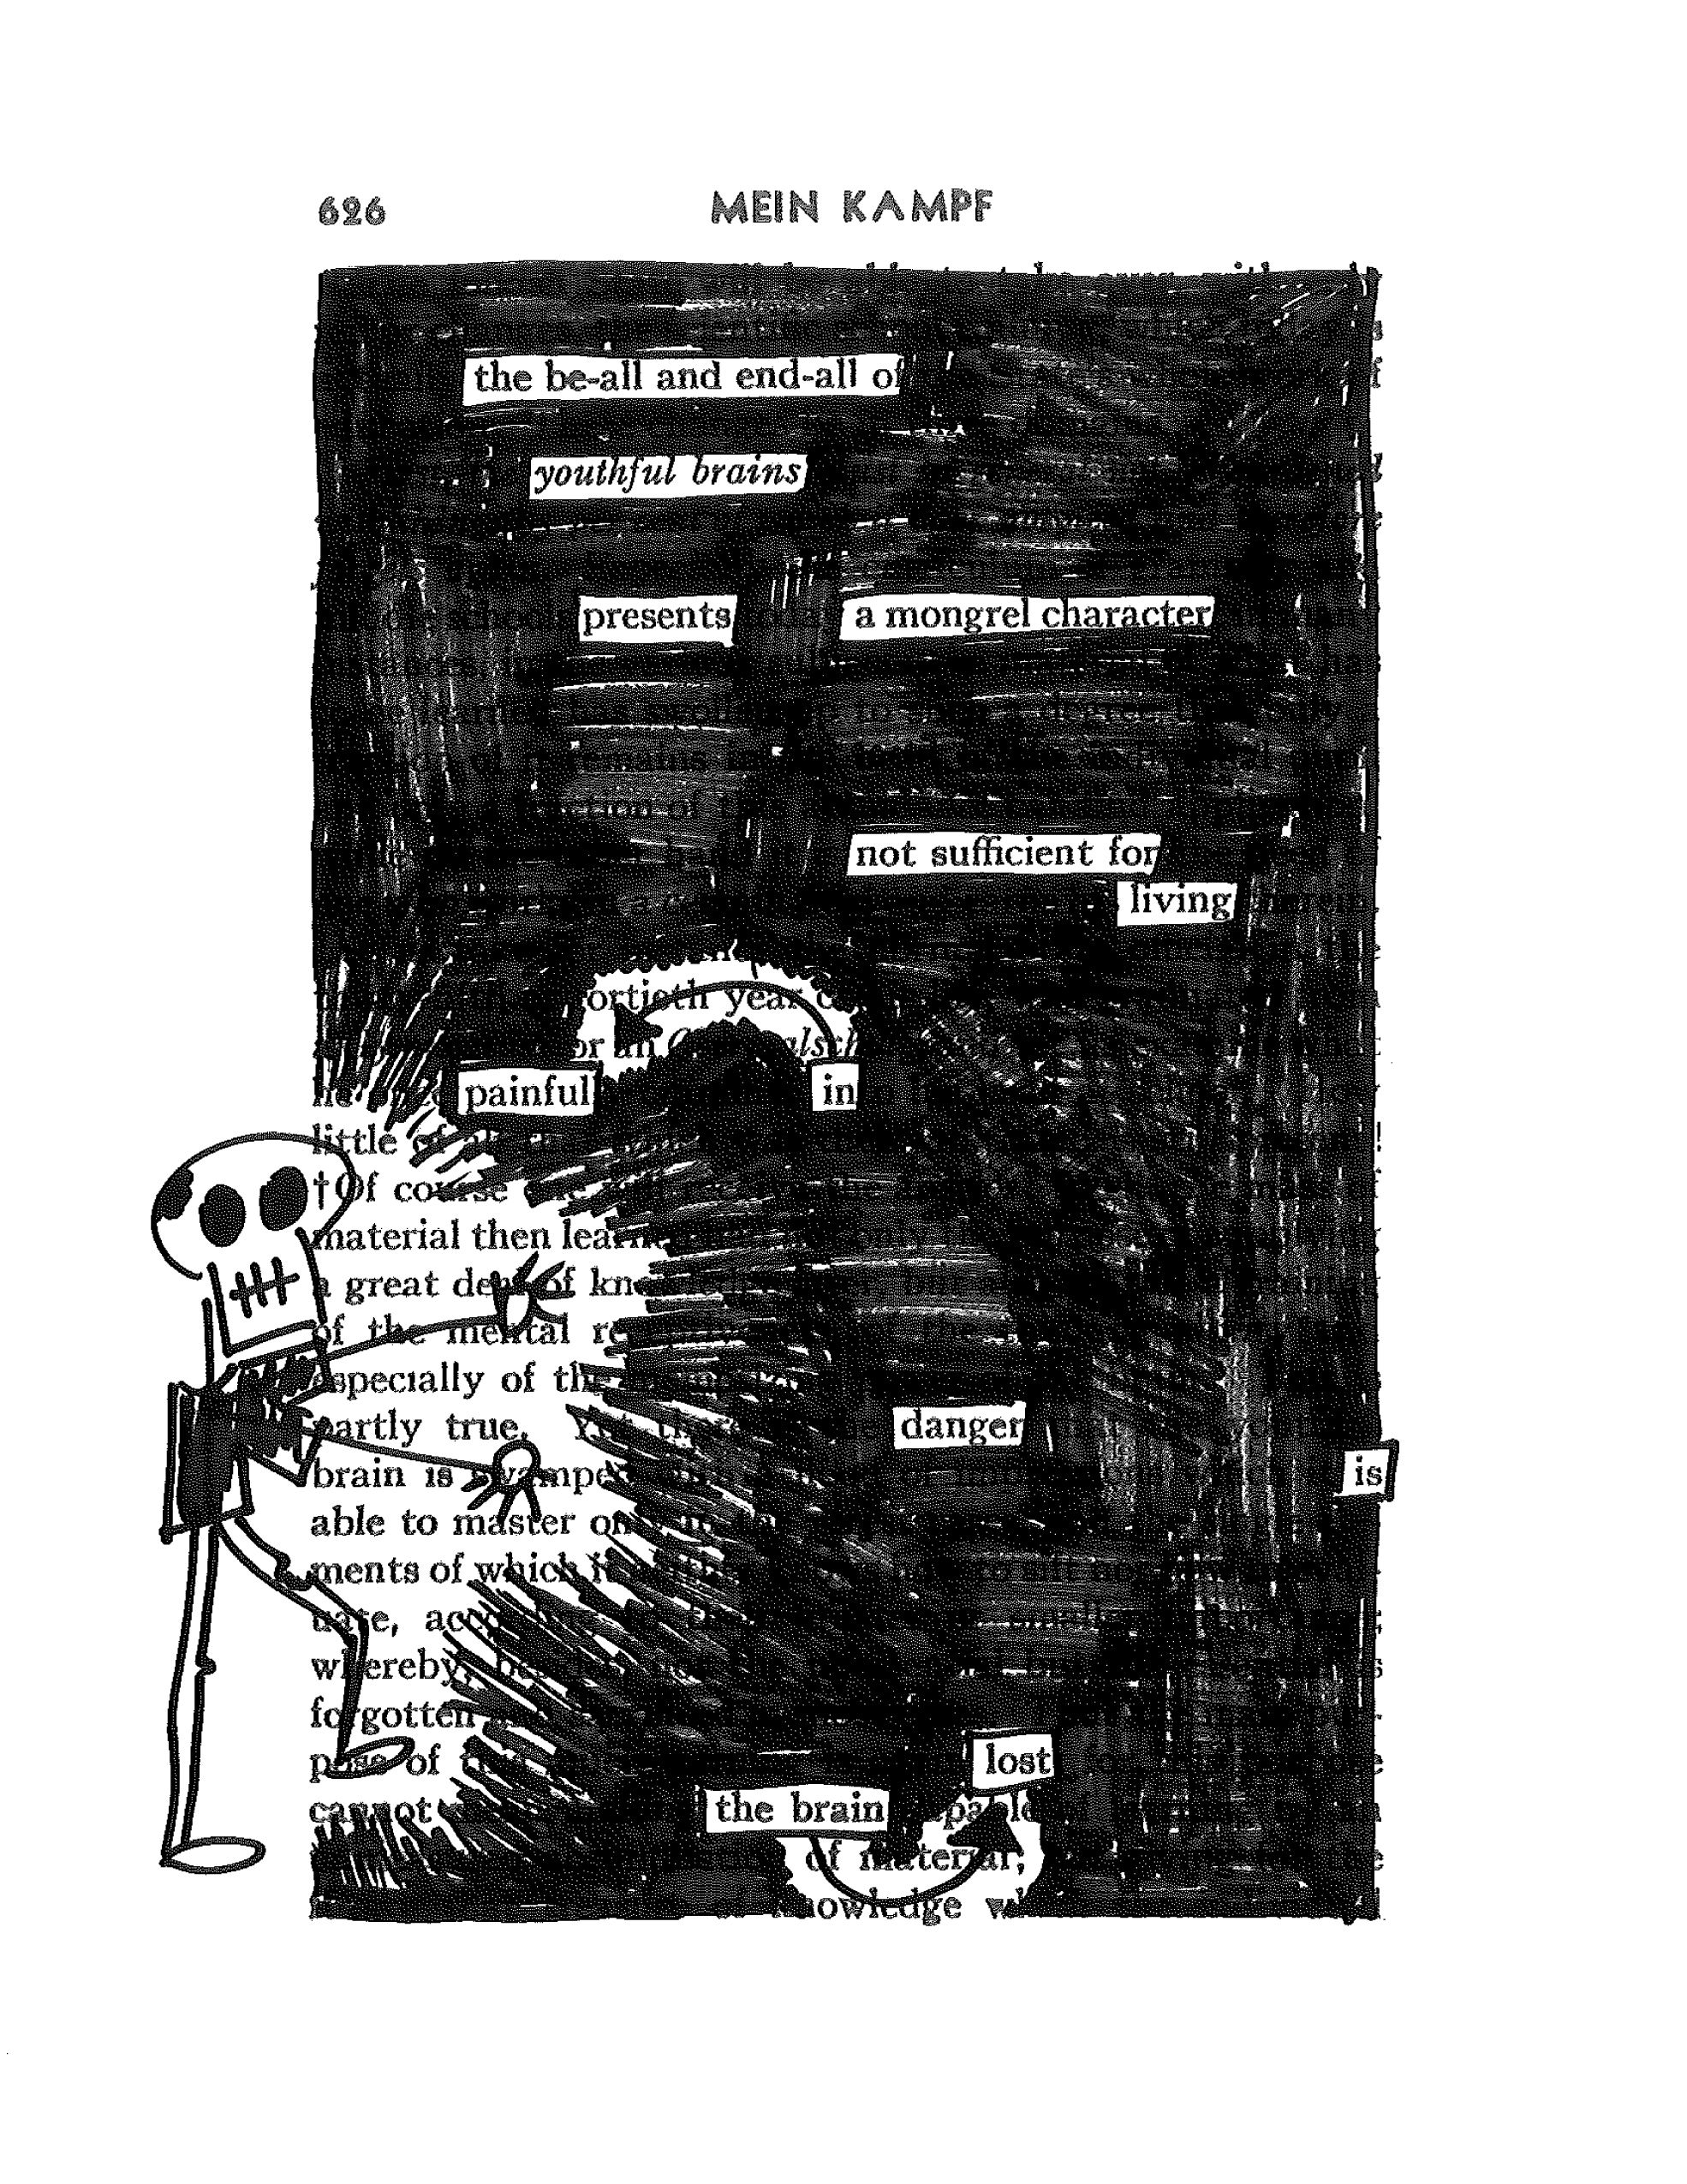 Blackout Poetry With The Book Thief | Blackout Poetry, The